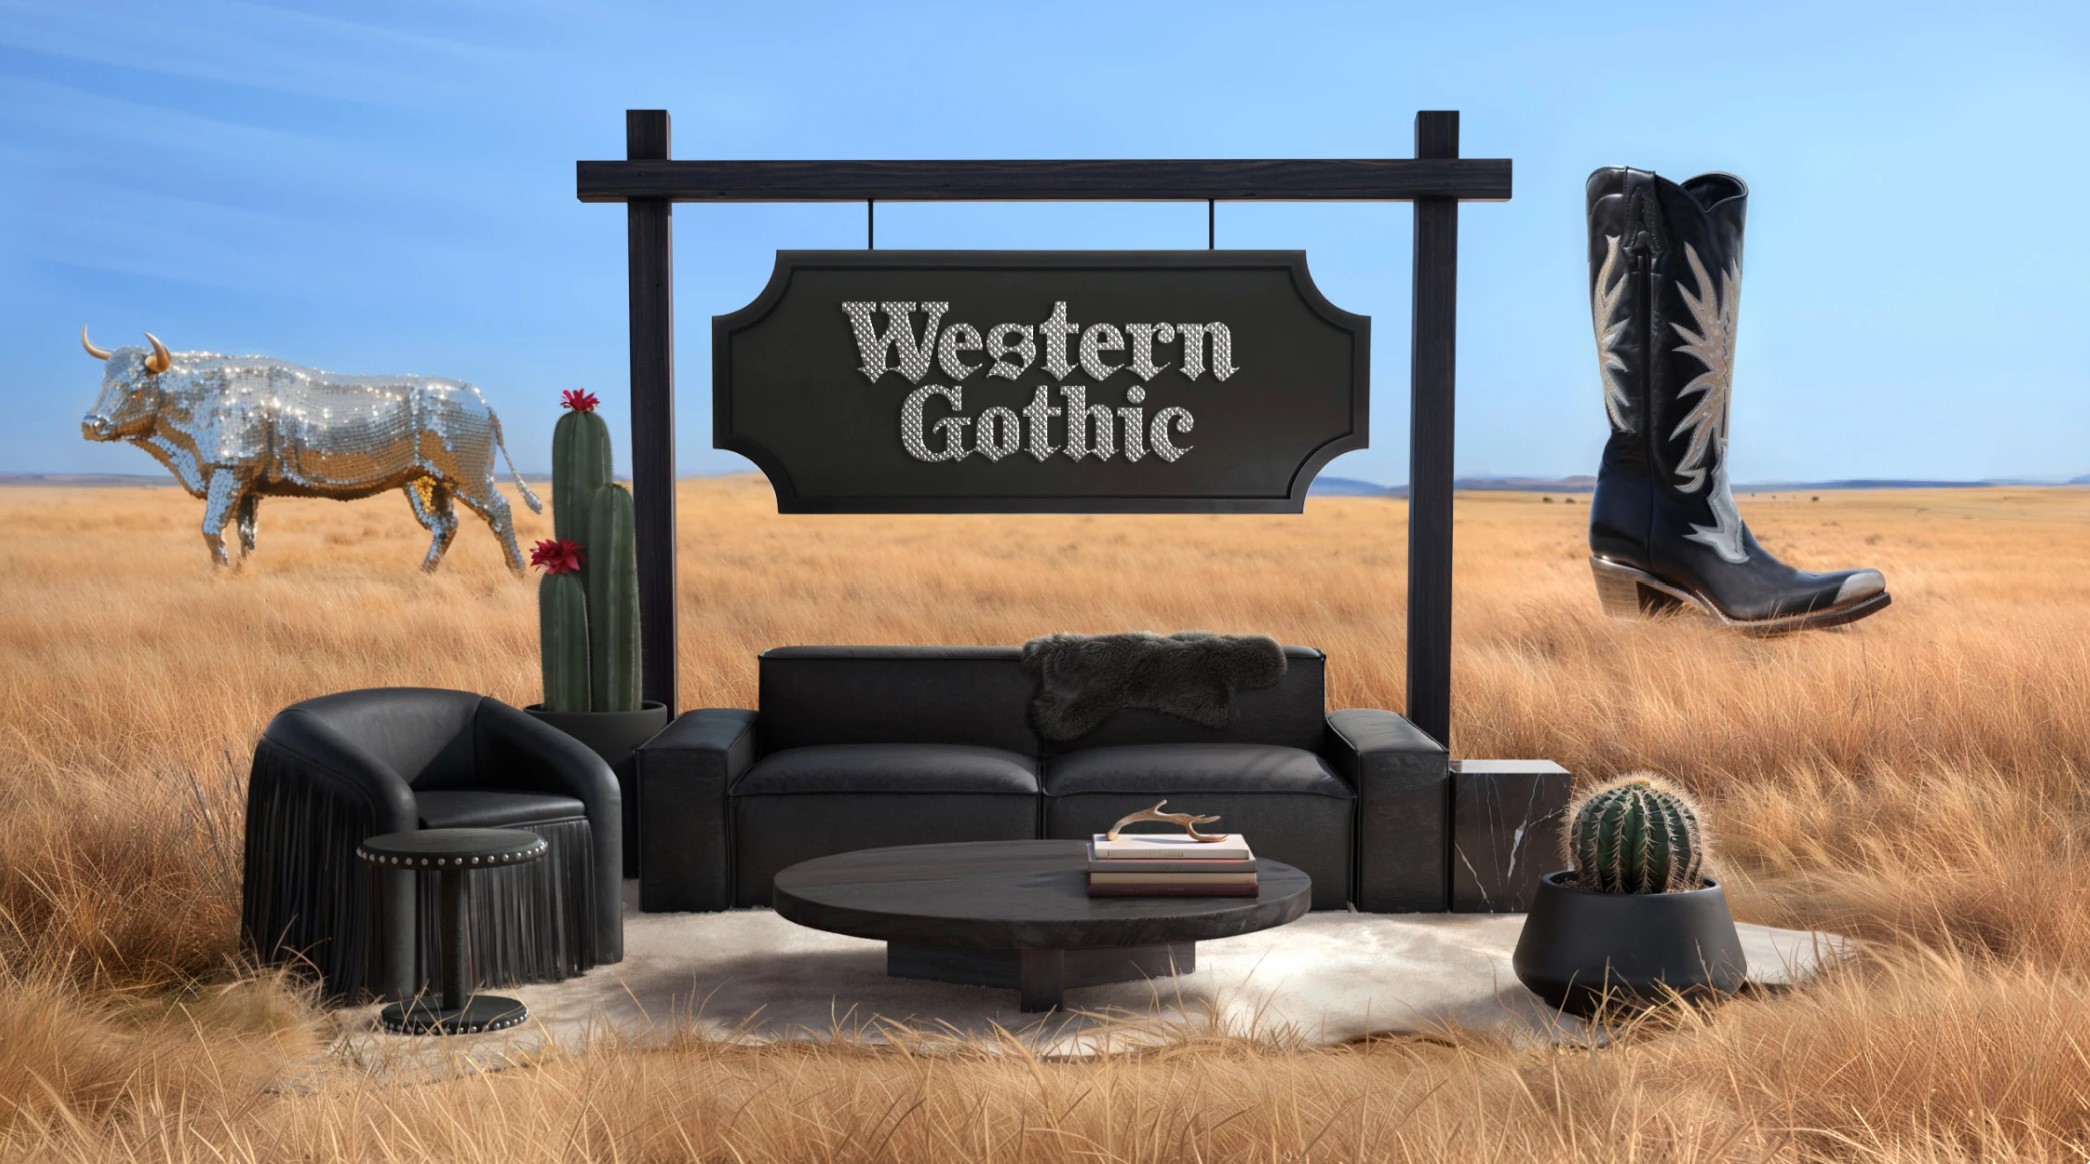 What is Western Gothic